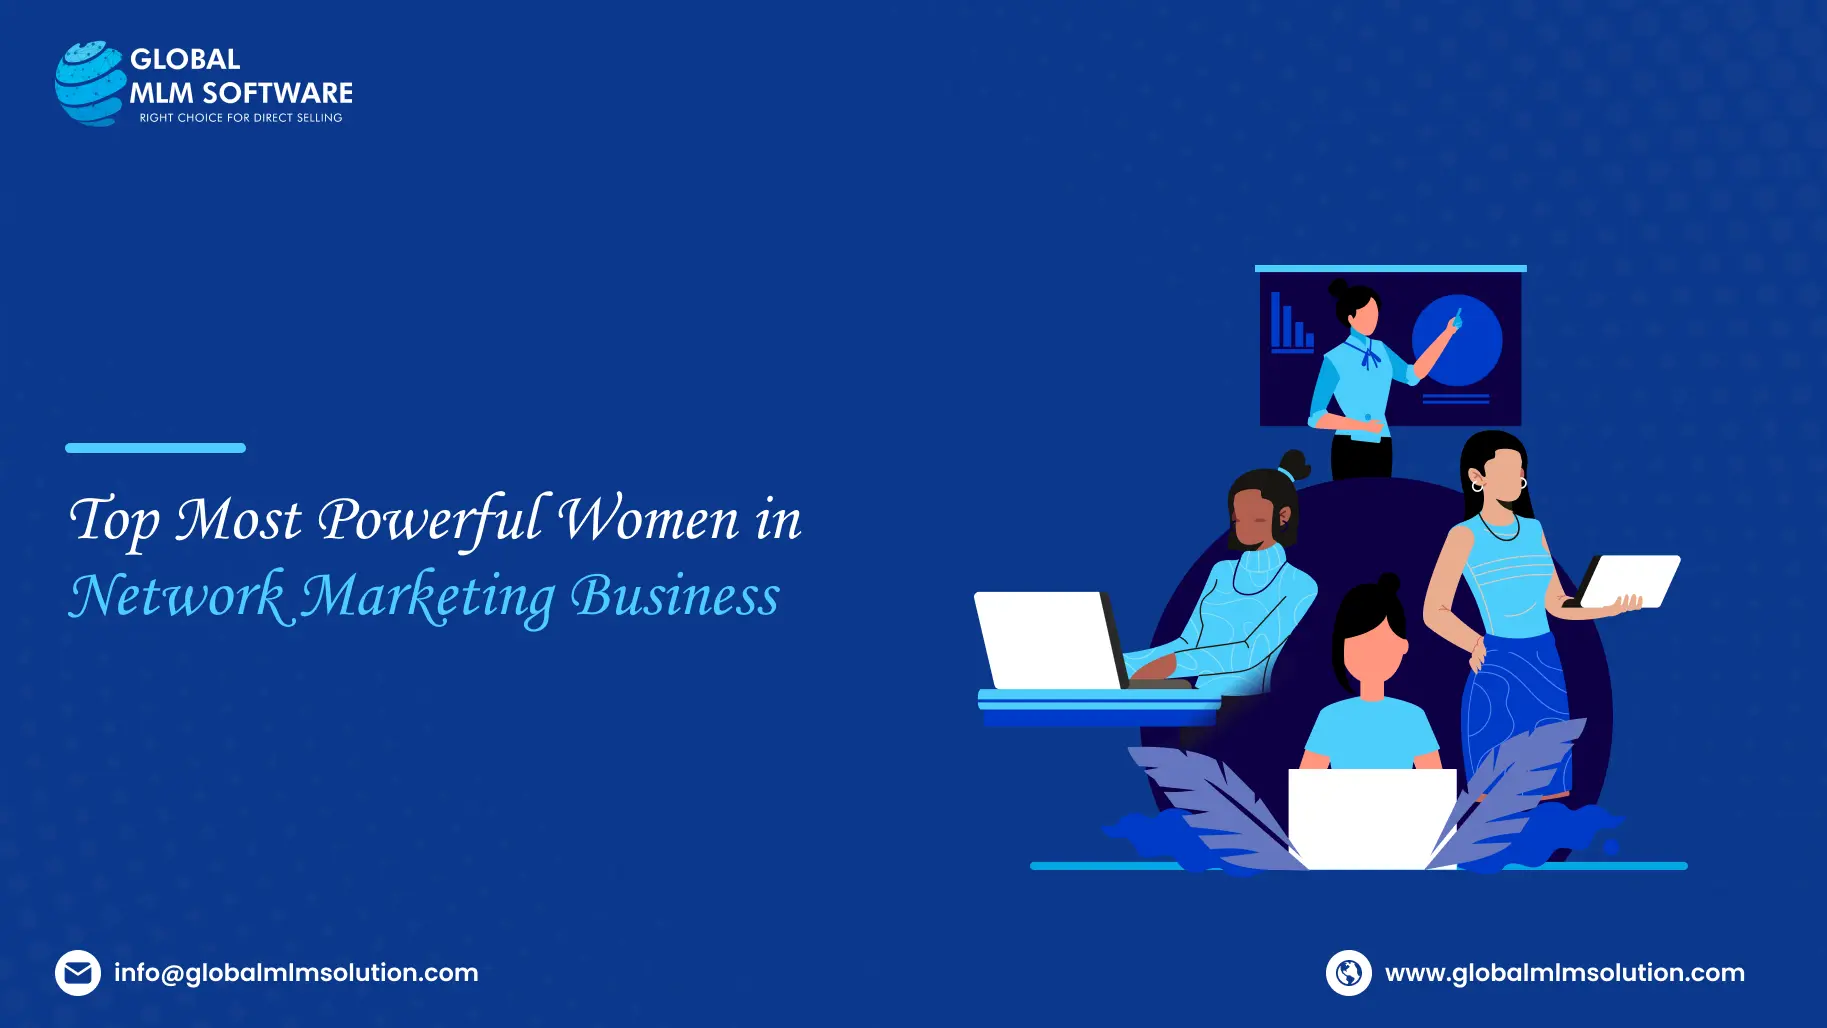 Top Most Powerful Women in Network Marketing Business